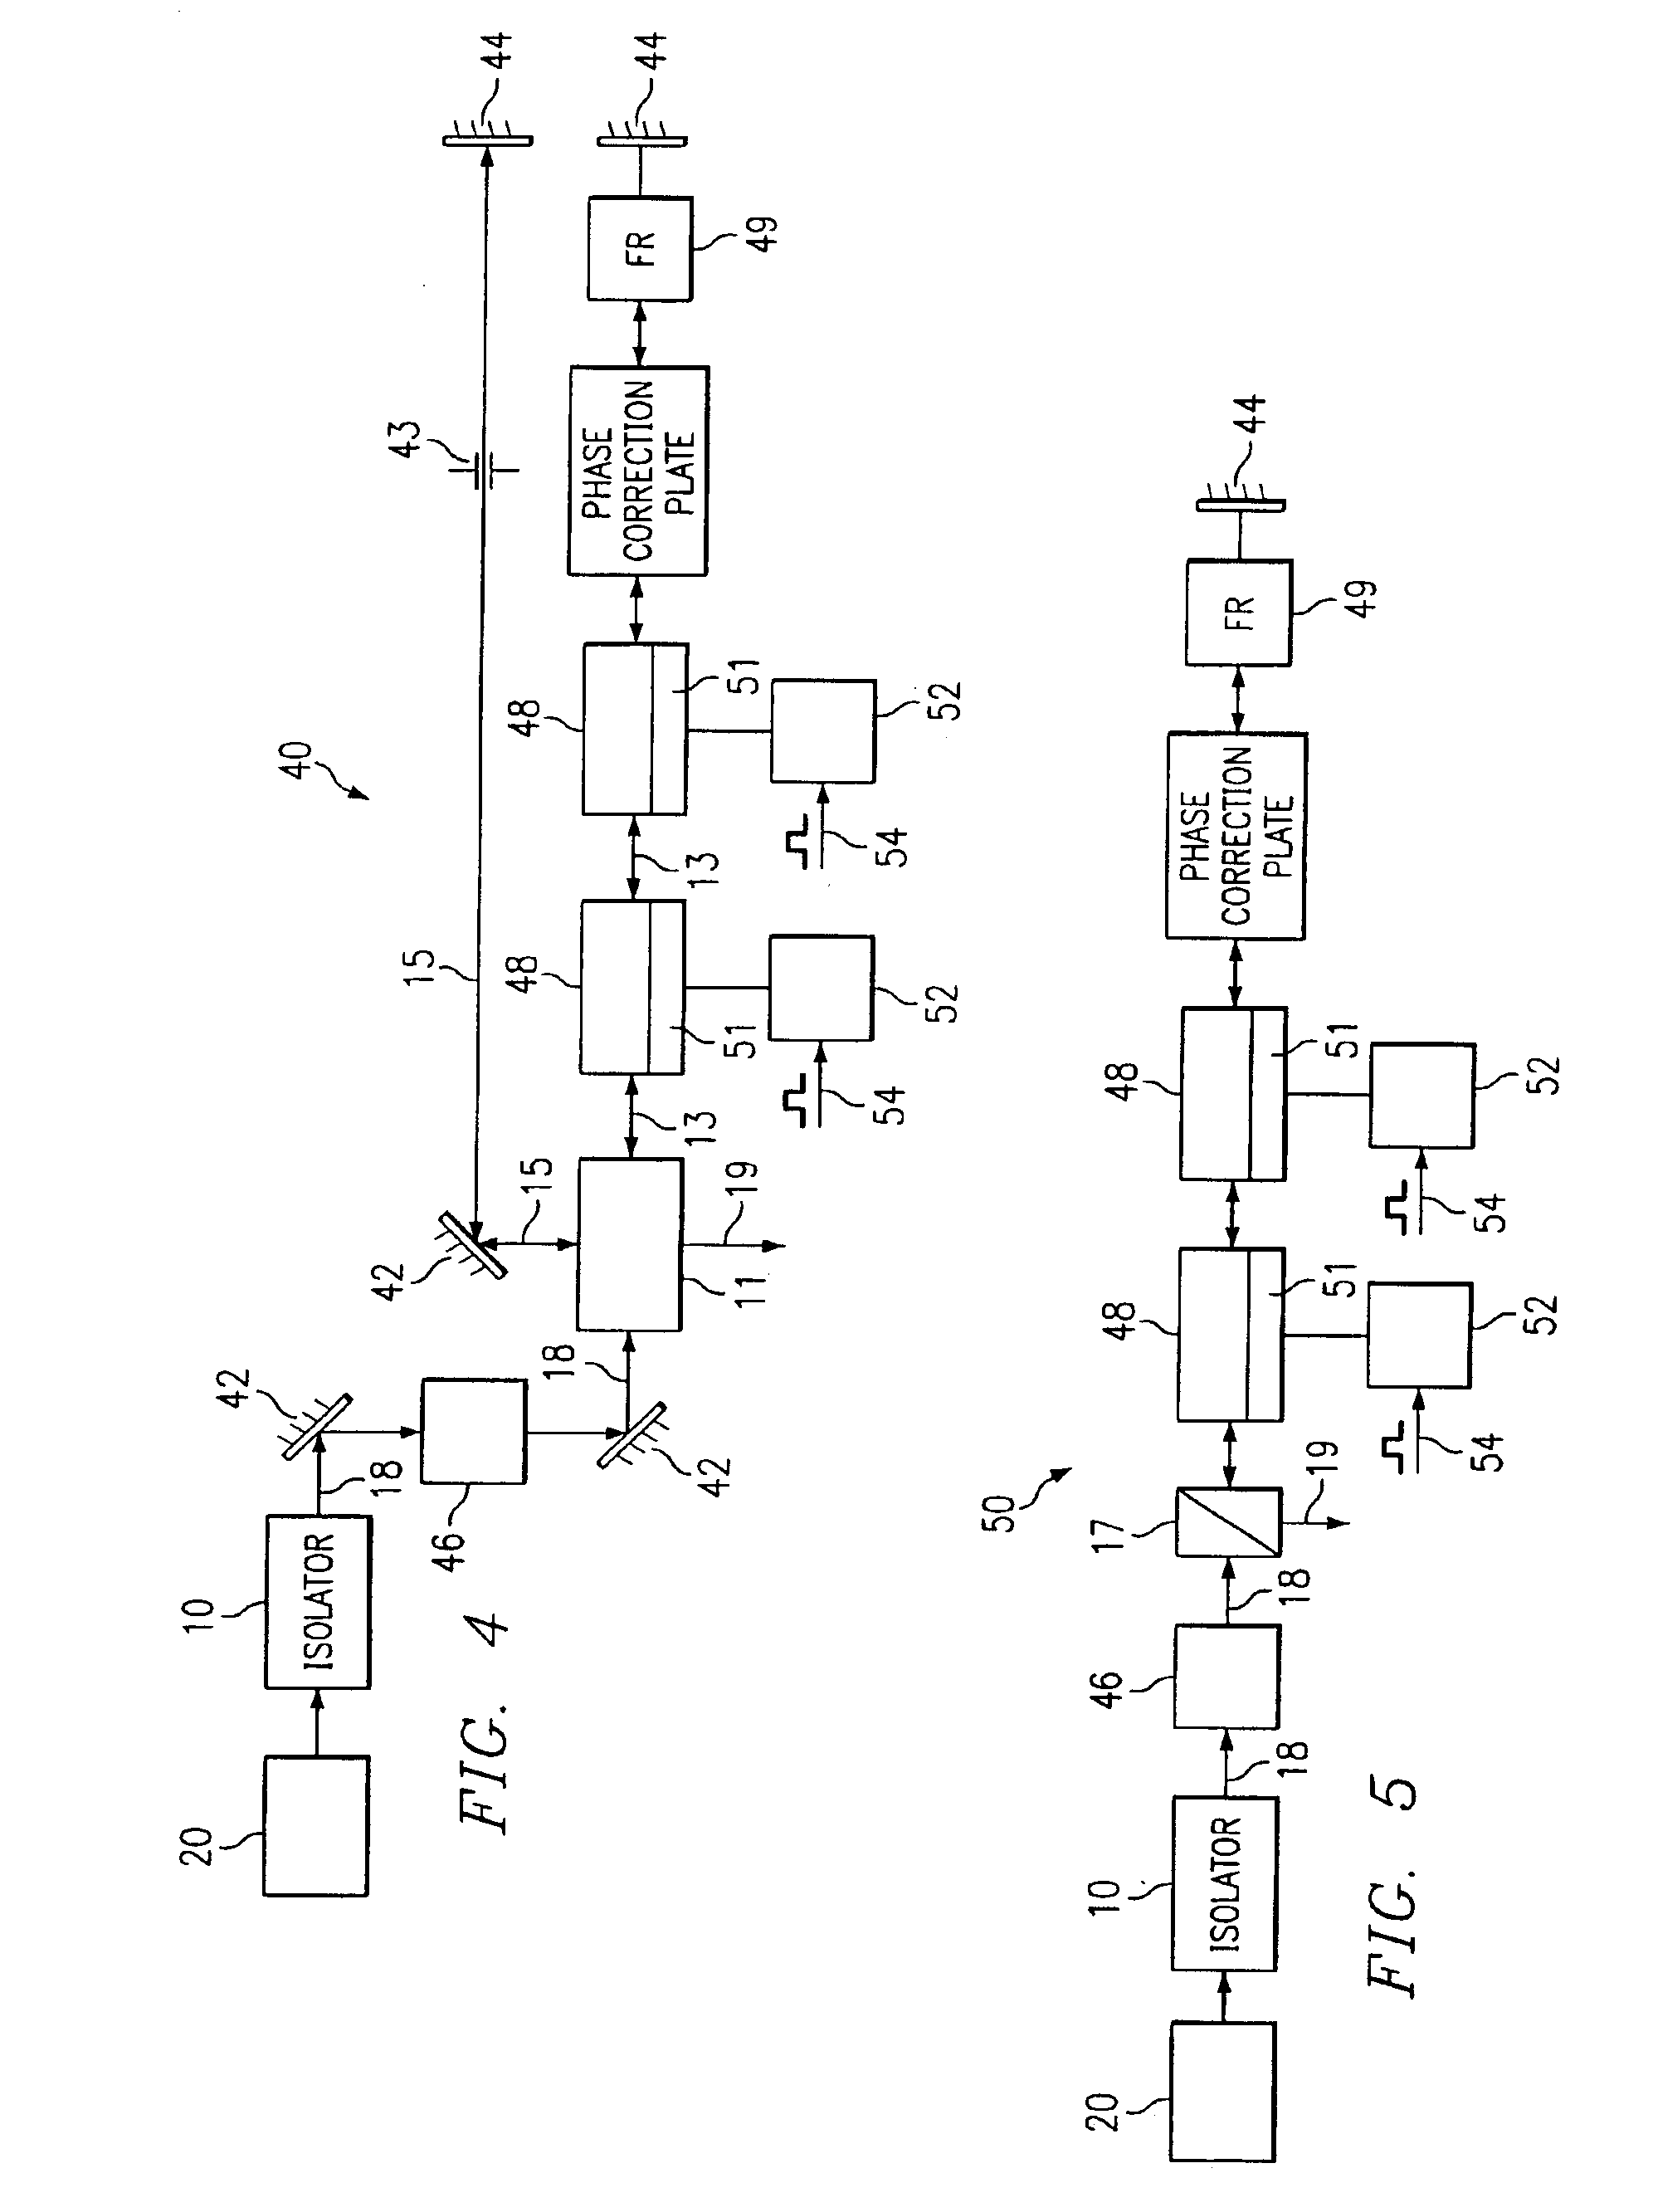 System and method for high-speed laser detection of ultrasound